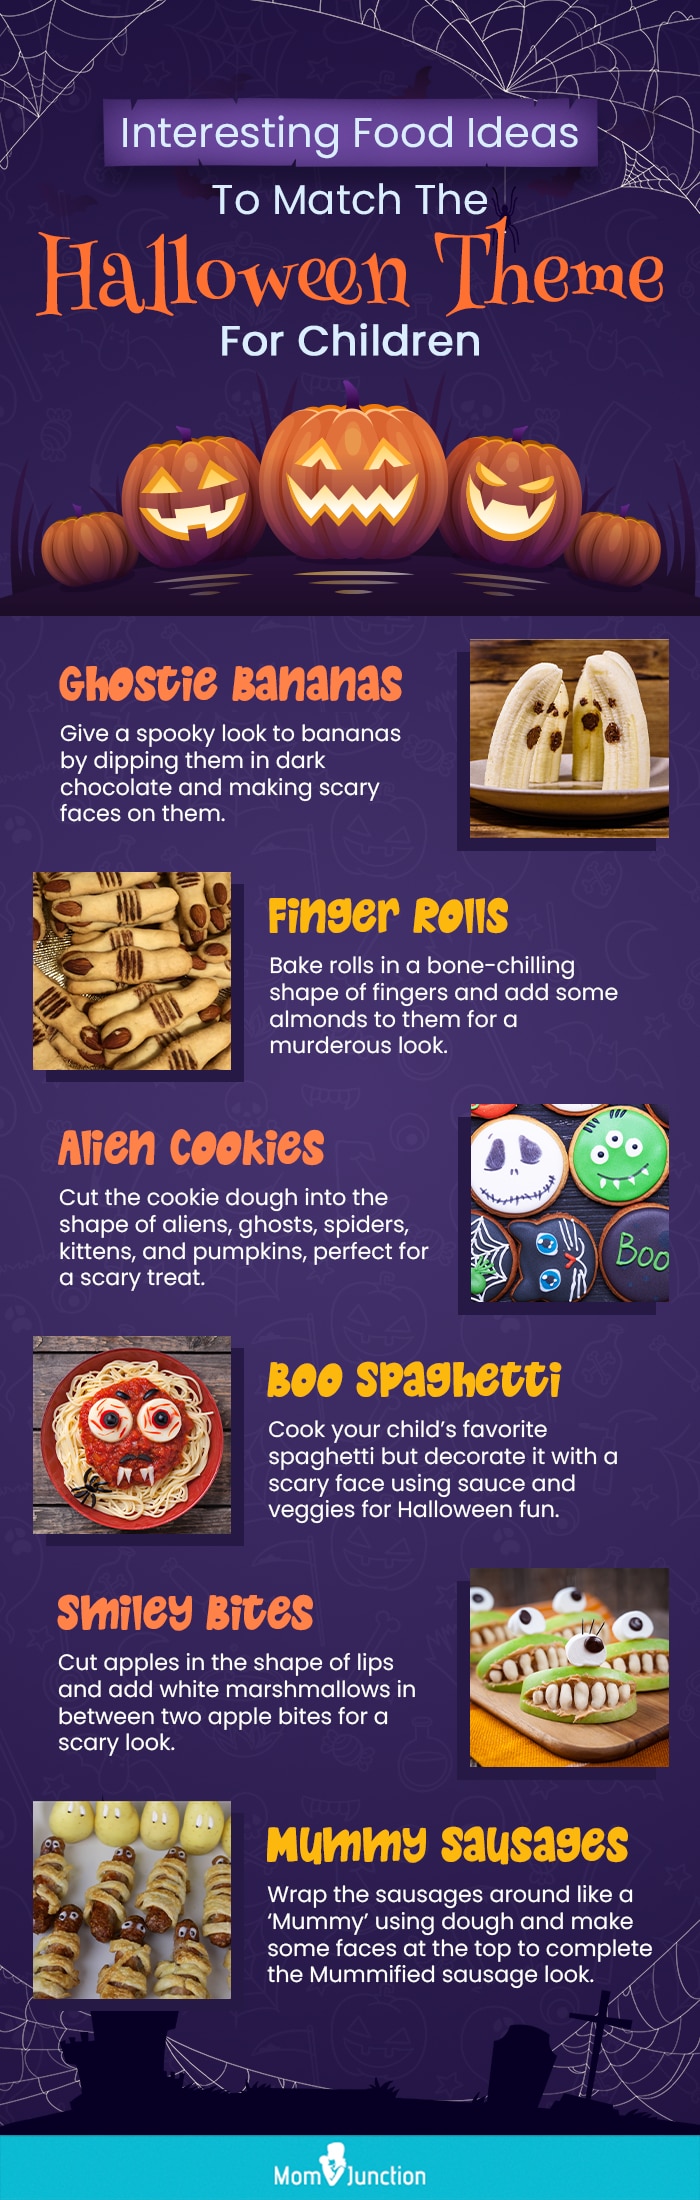 interesting food ideas to match the halloween theme for children (infographic)